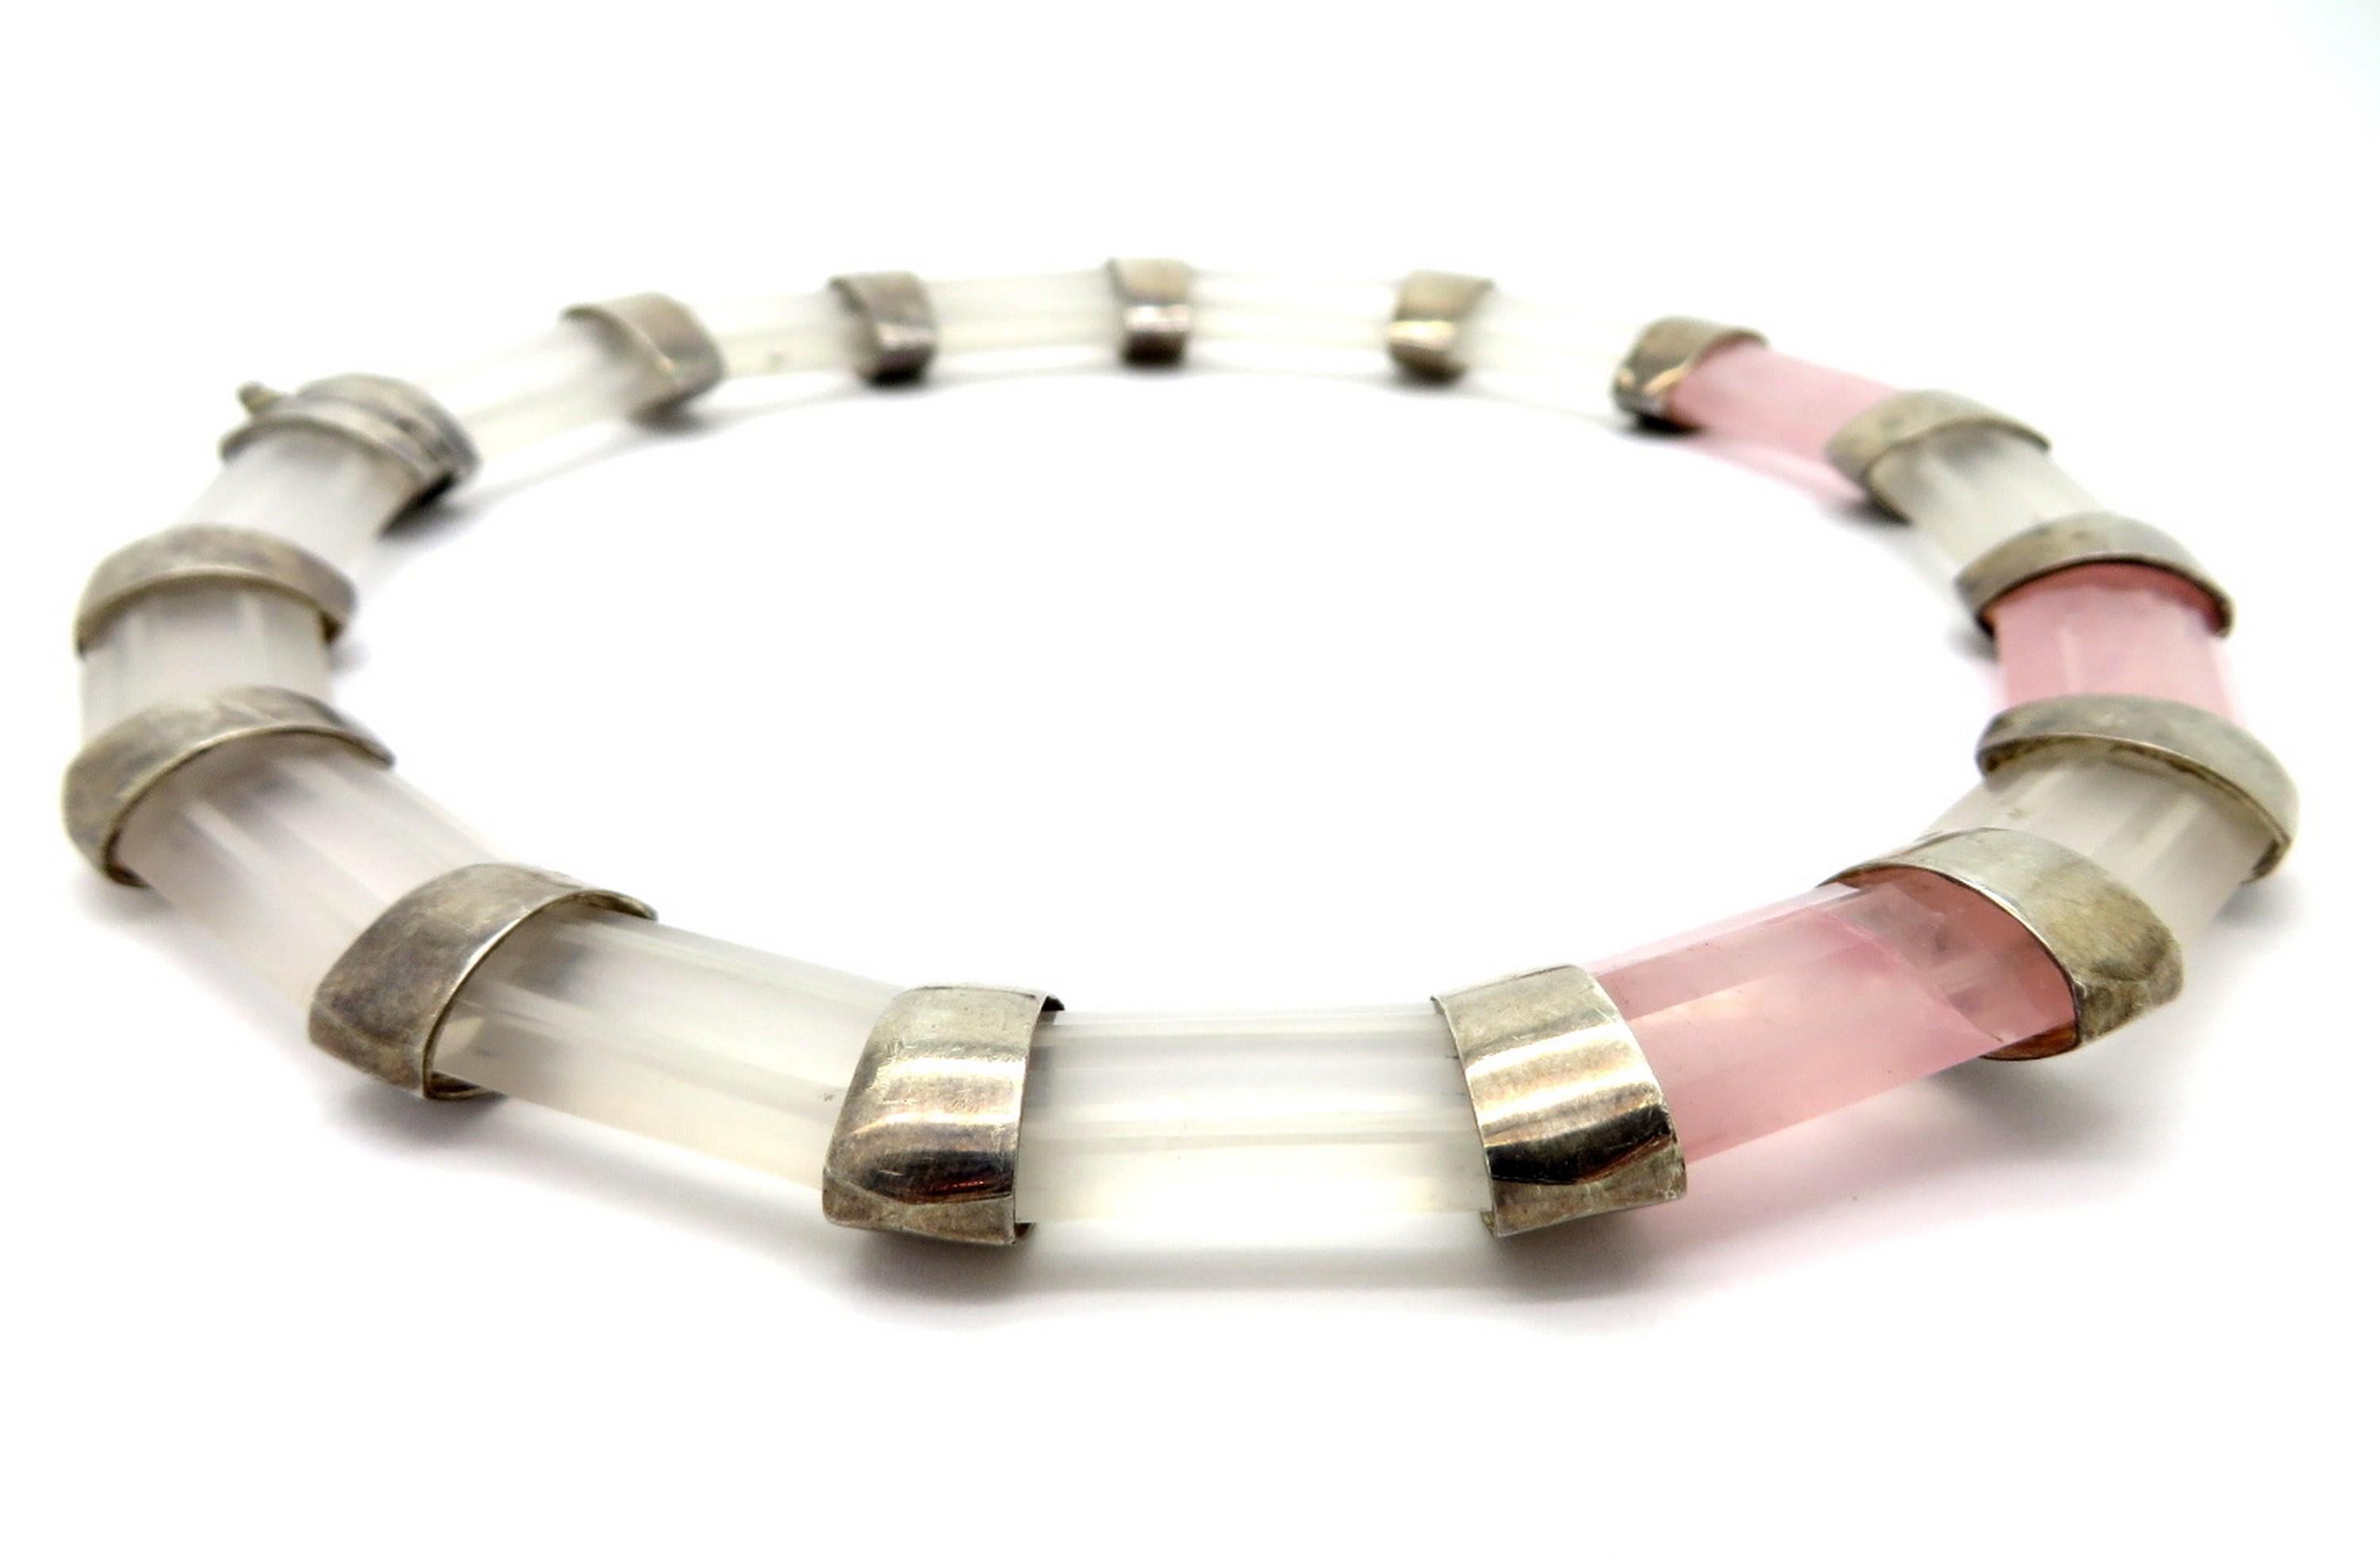 Sterling silver white and rose quartz fashion statement choker necklace. Featuring 12 faceted white quartz gemstones and three rose quartz gemstones. It is secured with a fold over clasp. The necklace measures 16” inches long and 18 mm wide. The